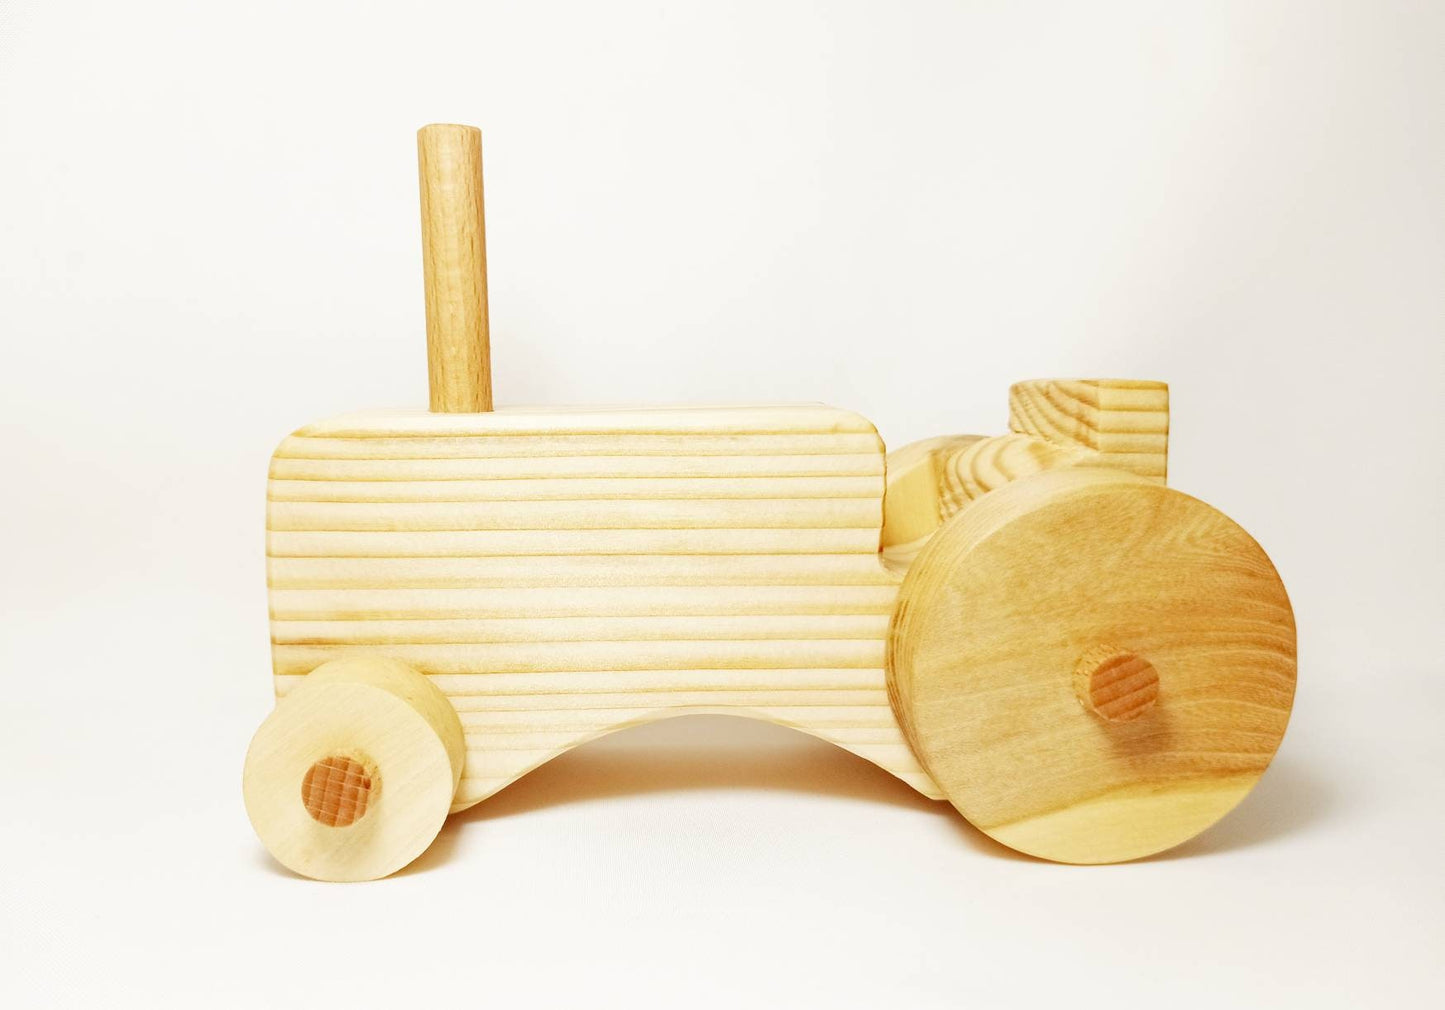 Tractor wooden toy, tractor wooden toy, farm toy for kids, christmas gift for kids, first birthday gift, wooden transportation toy